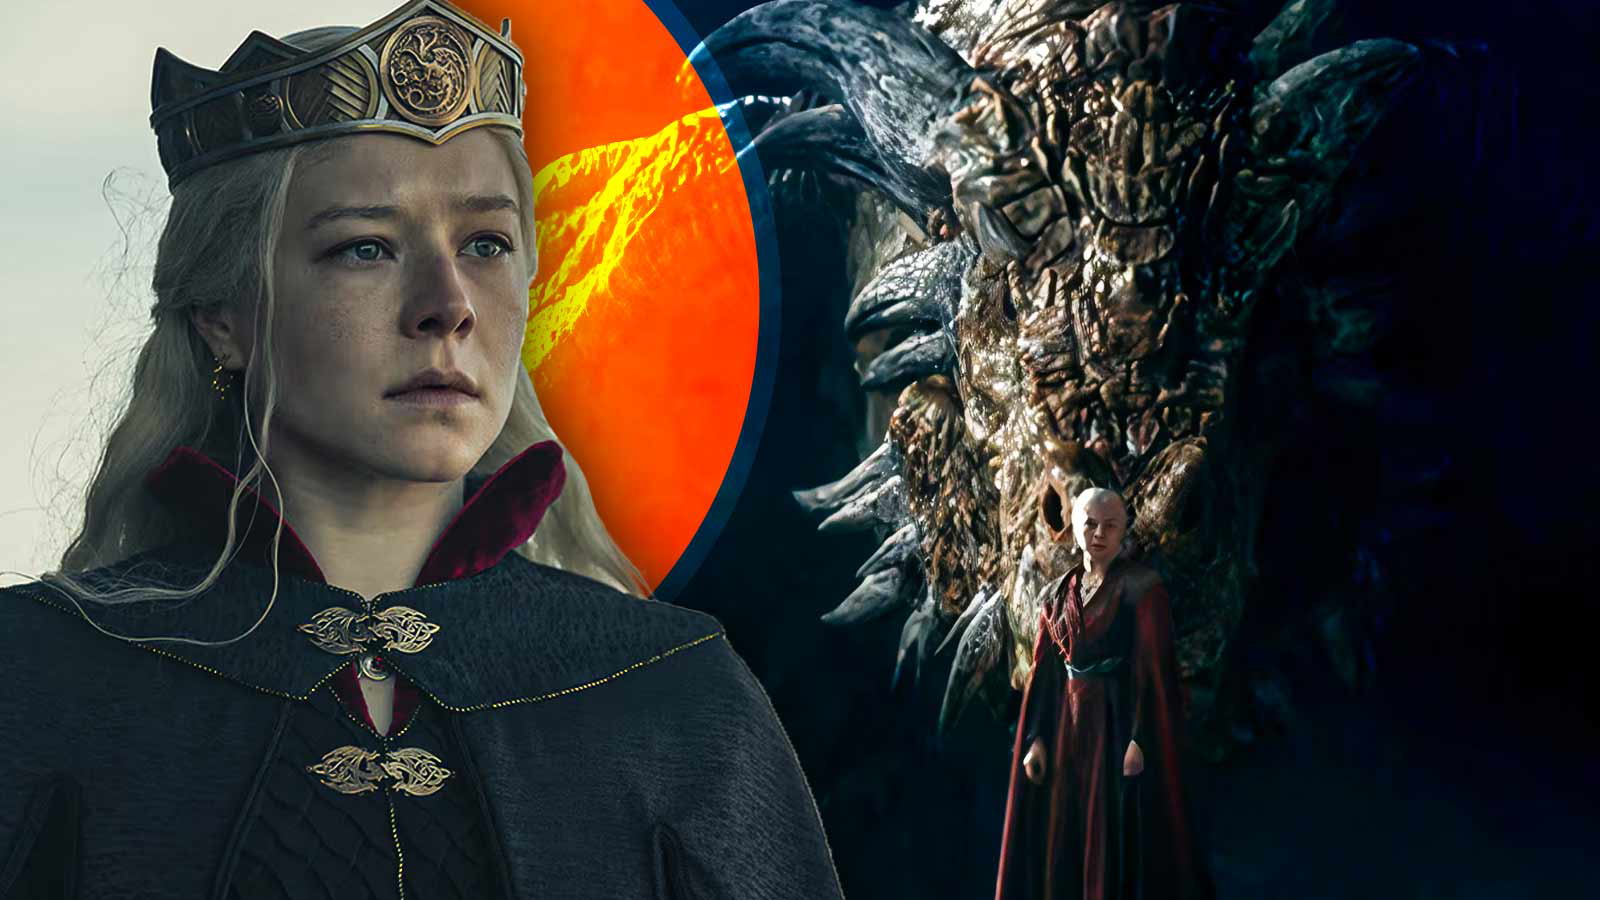 “My first time seeing live men set themselves on fire”: House of the Dragon Star Emma D’Arcy Reveals How They Filmed Vermithor’s Horrific Scene